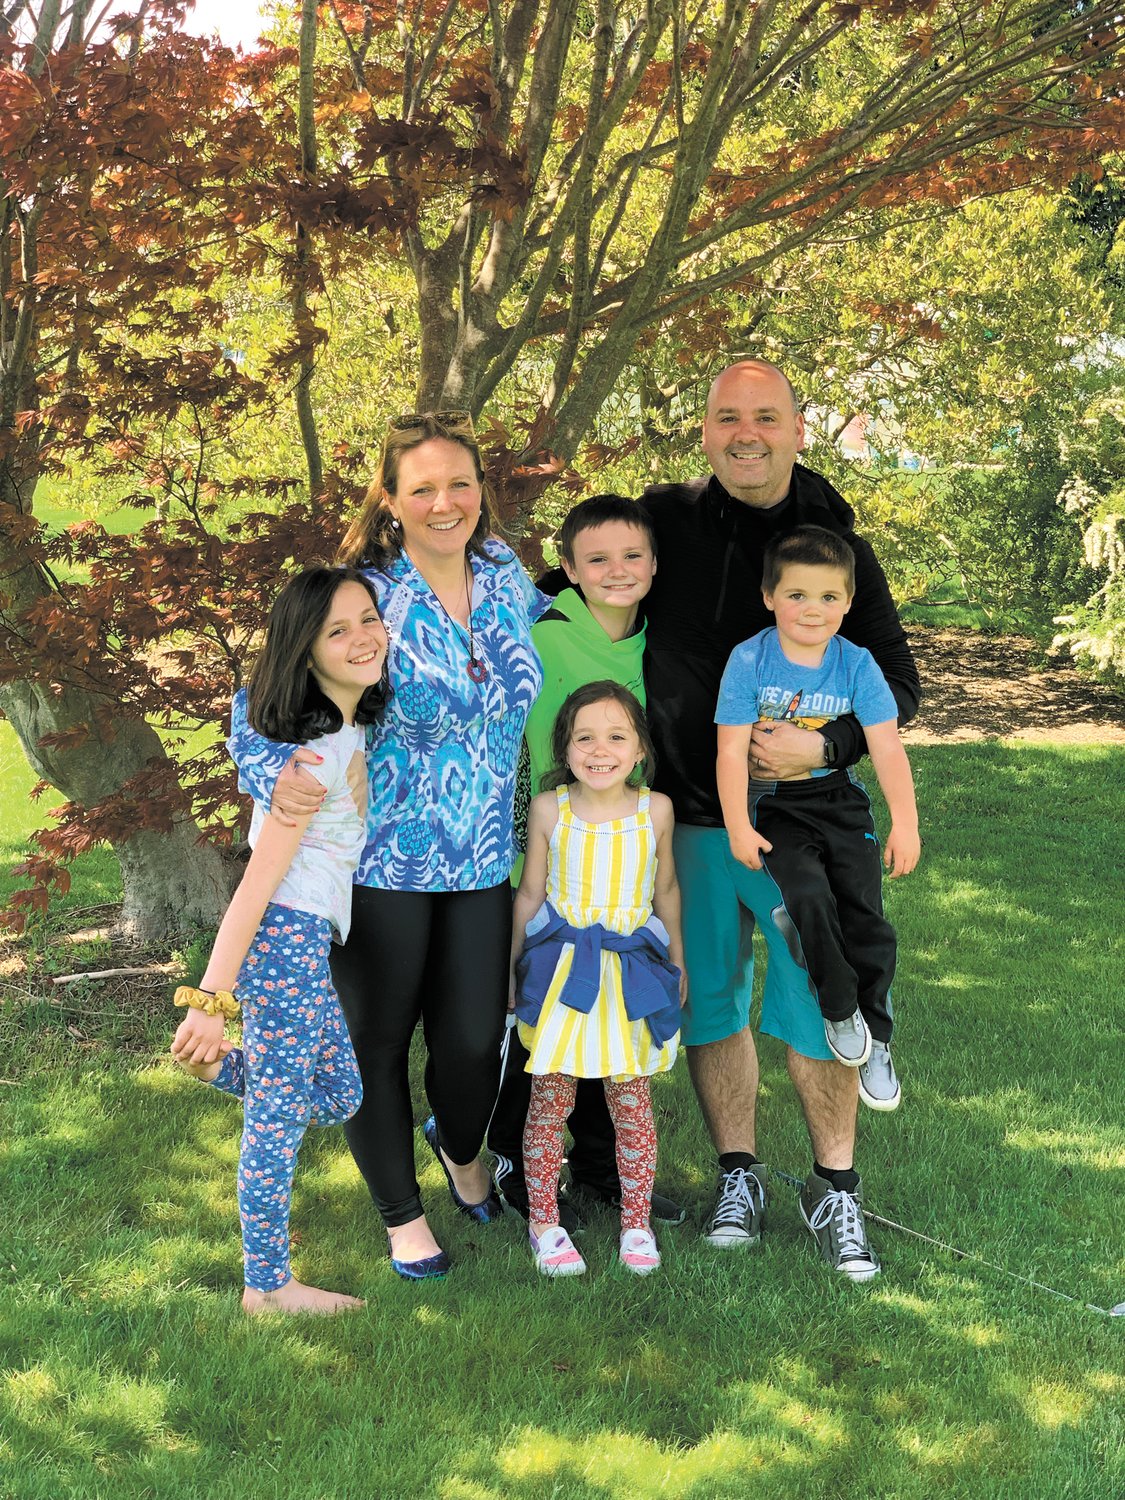 NEW FOSTER PARENTS: Tori and DJ Canario became foster parents in September 2021 and have had two placements of children during that time. The couple is currently fostering three teenagers while raising four children of their own. (From left) Rylee Canario (9), Tori Canario, Mikey Canario (11), Hannah (6), Dennis Canario and Danny Canario (4).